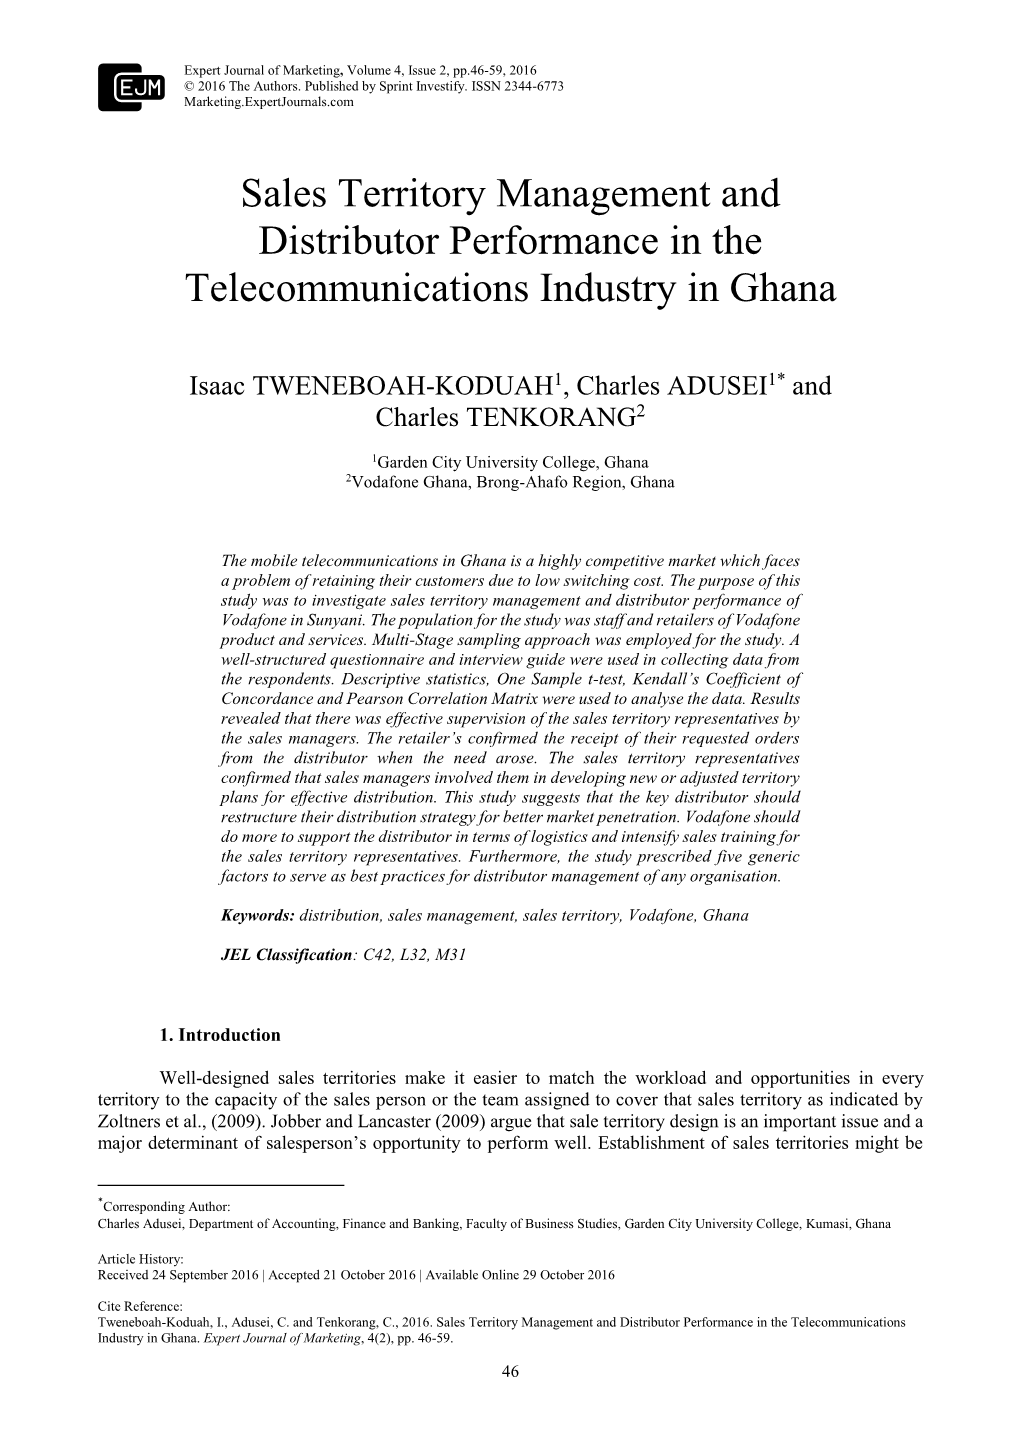 Sales Territory Management and Distributor Performance in the Telecommunications Industry in Ghana